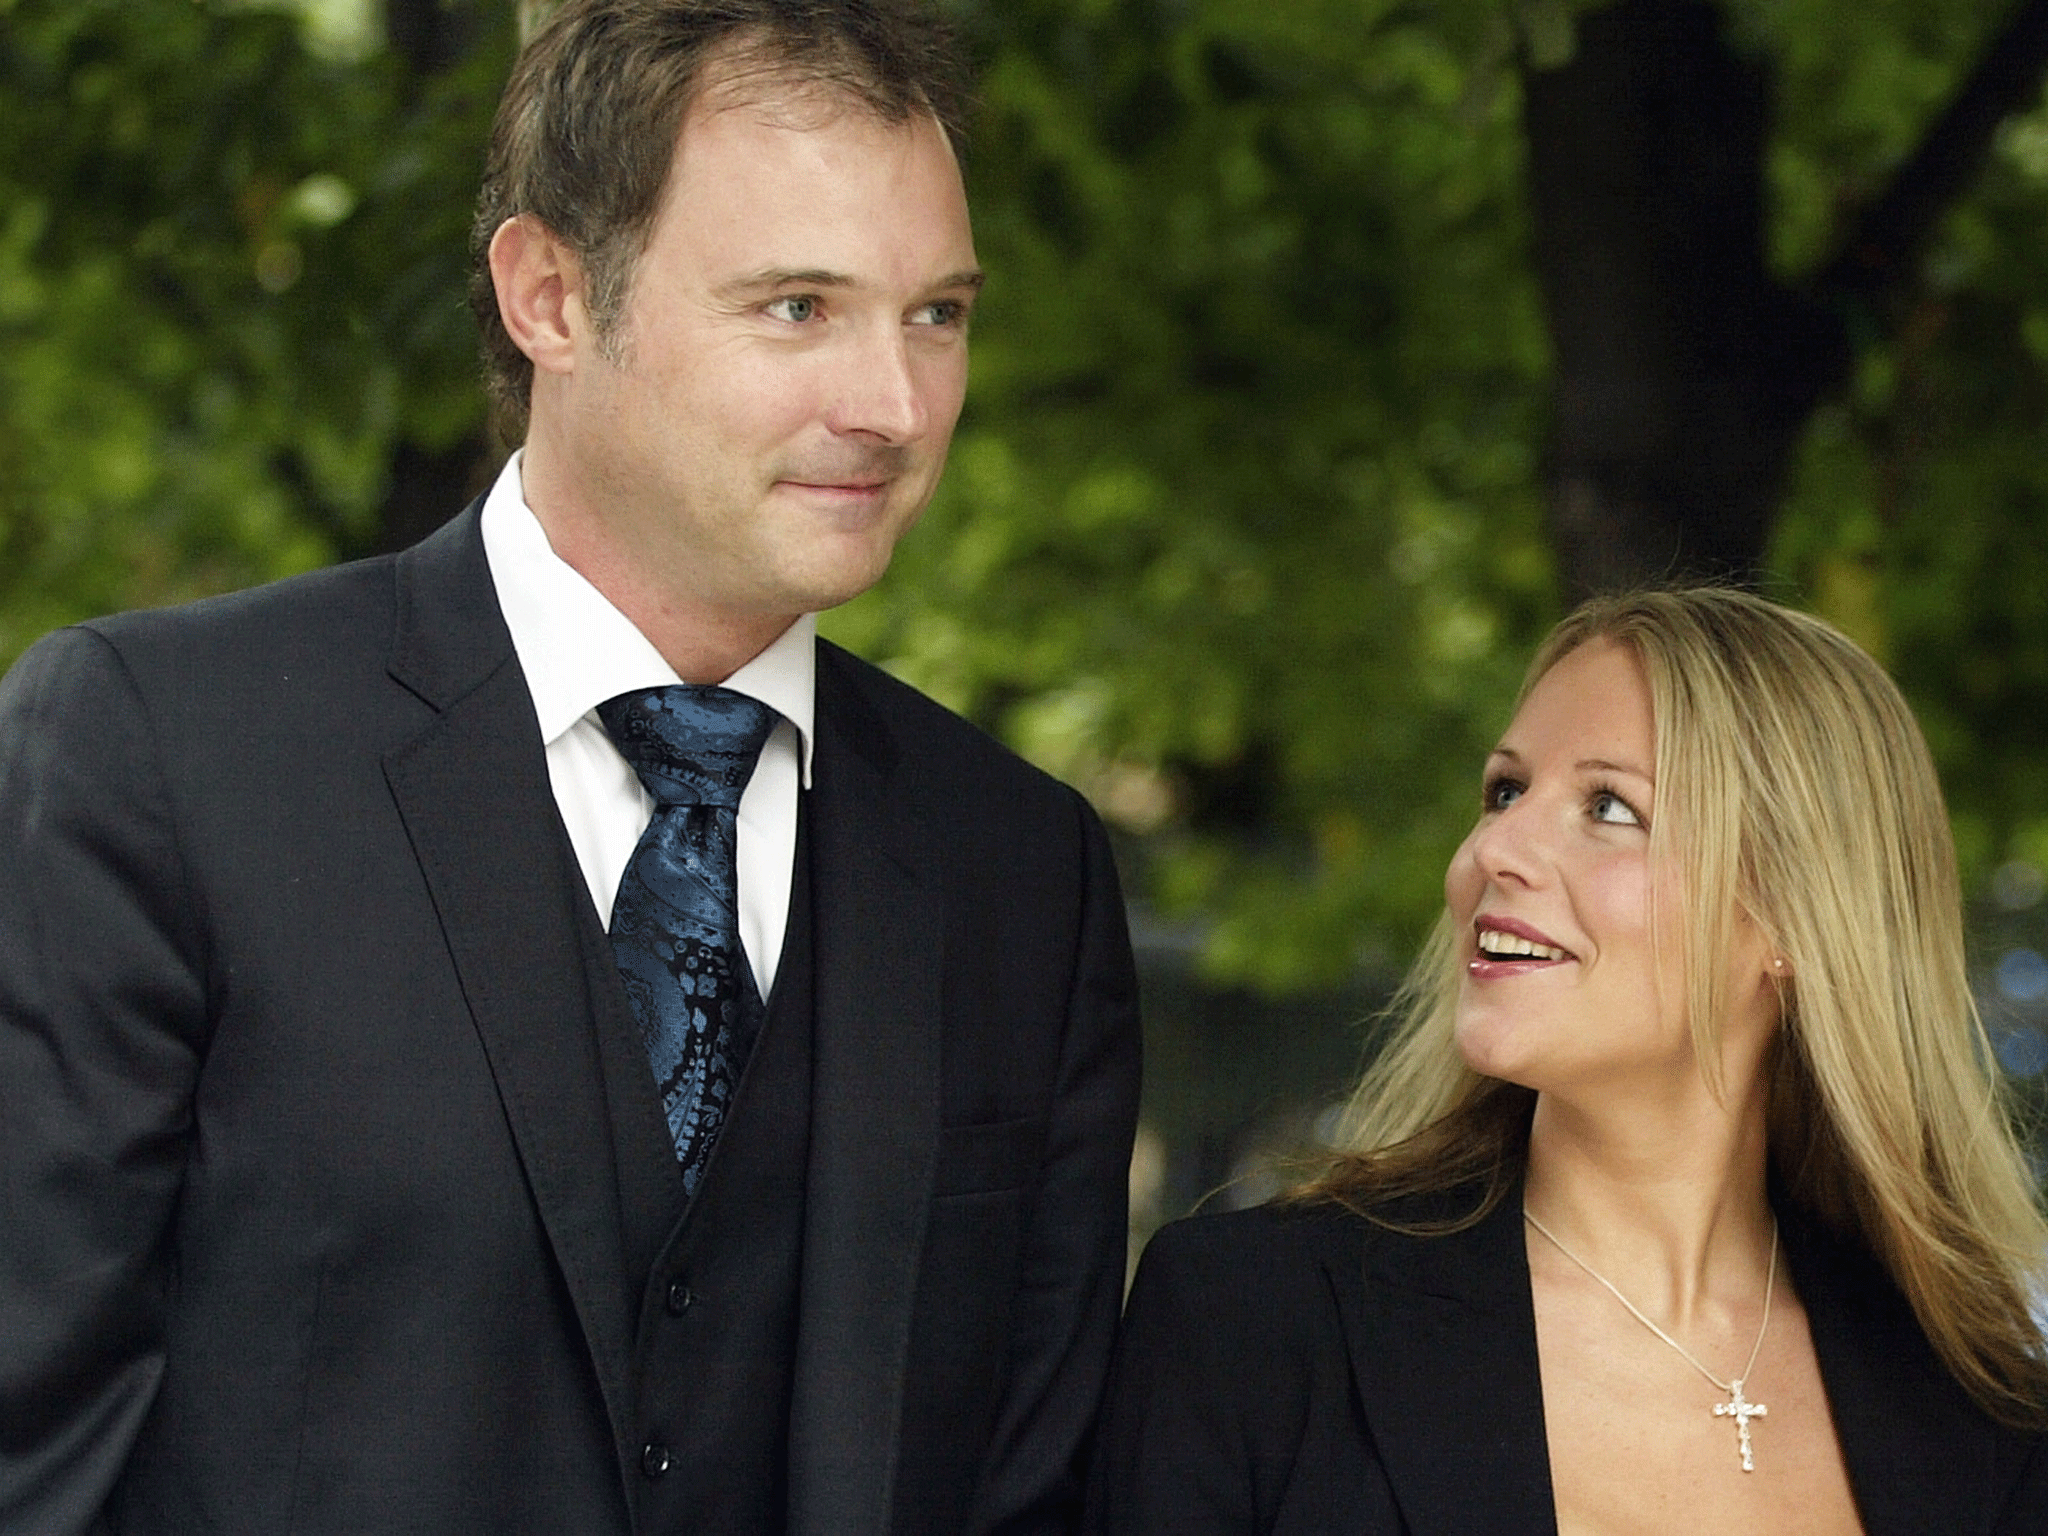 Former television presenter John Leslie (R) speaks to the media after leaving Southwark Crown Court watched by girlfriend Abby Titmuss and two british police officers July 31, 2003 in London, England.